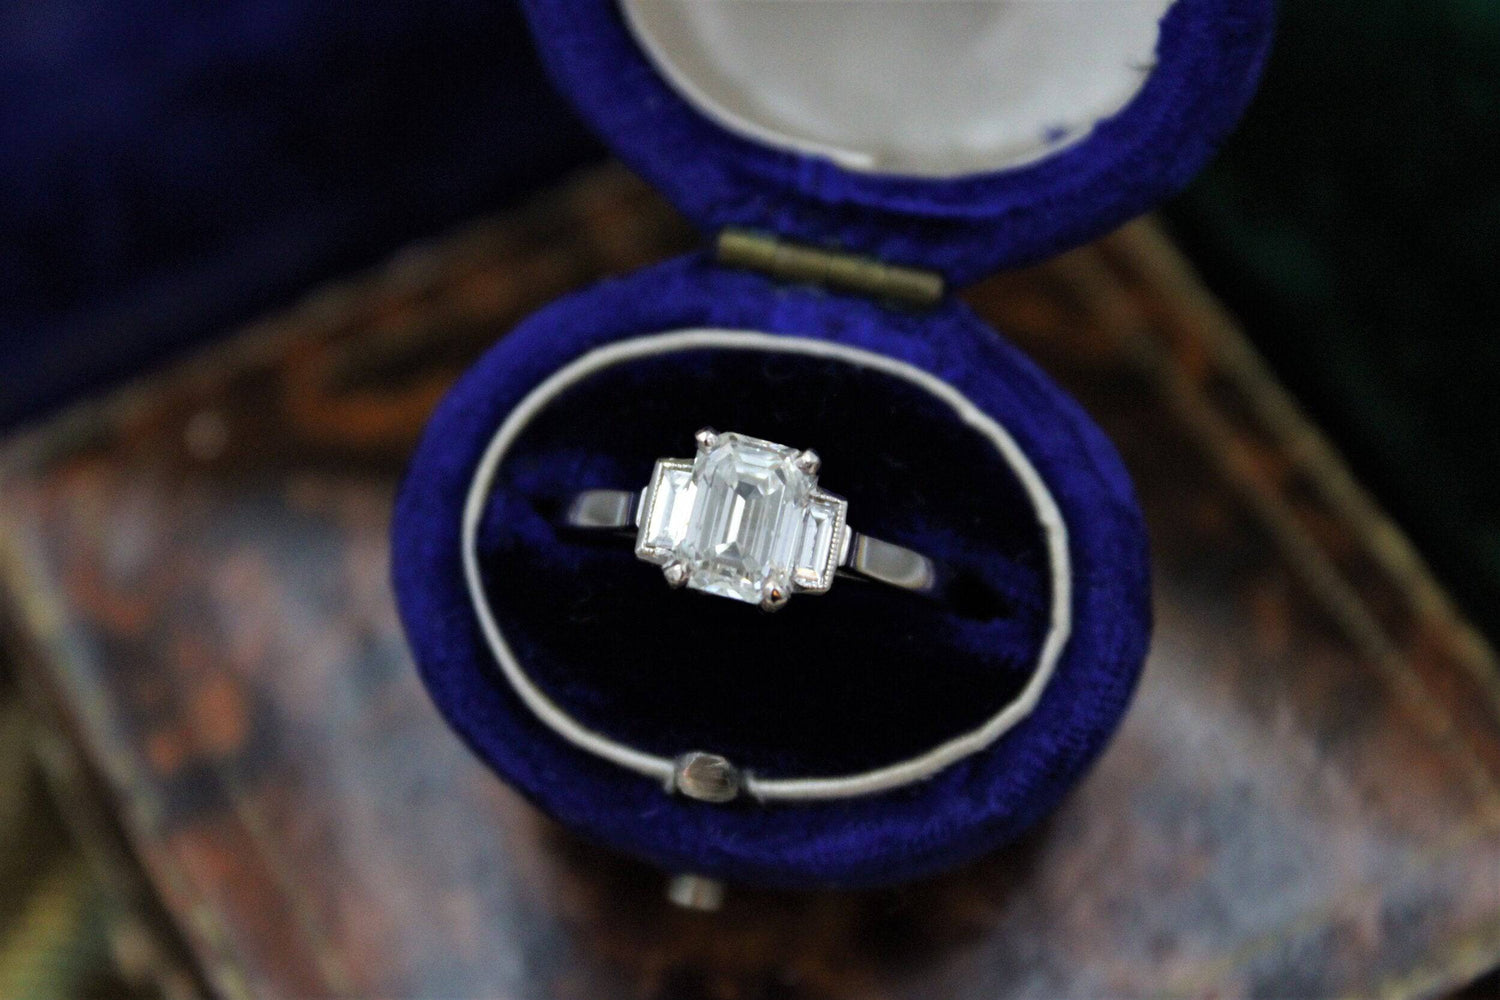 A very fine Emerald Cut Diamond Ring with Baguette Cut Shoulders set in 18ct White Gold, Pre-owned - Robin Haydock Antiques